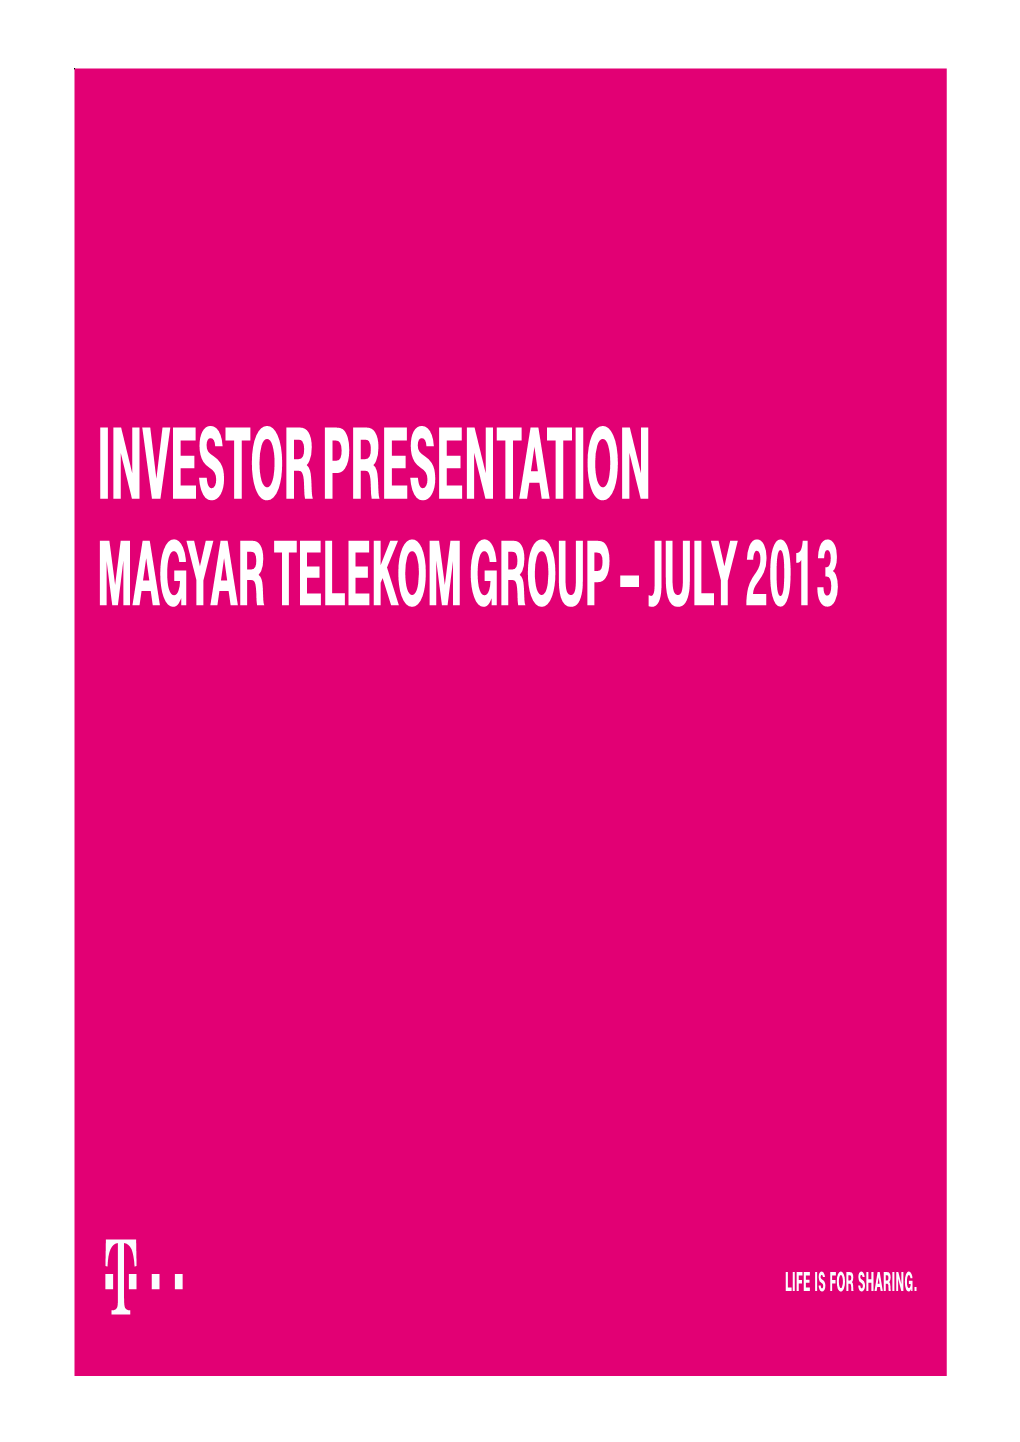 Investor Presentation Magyar Telekom Group – July 2013 Strategy, Outlook and Guidance Overview – Magyar Telekom Group at a Glance